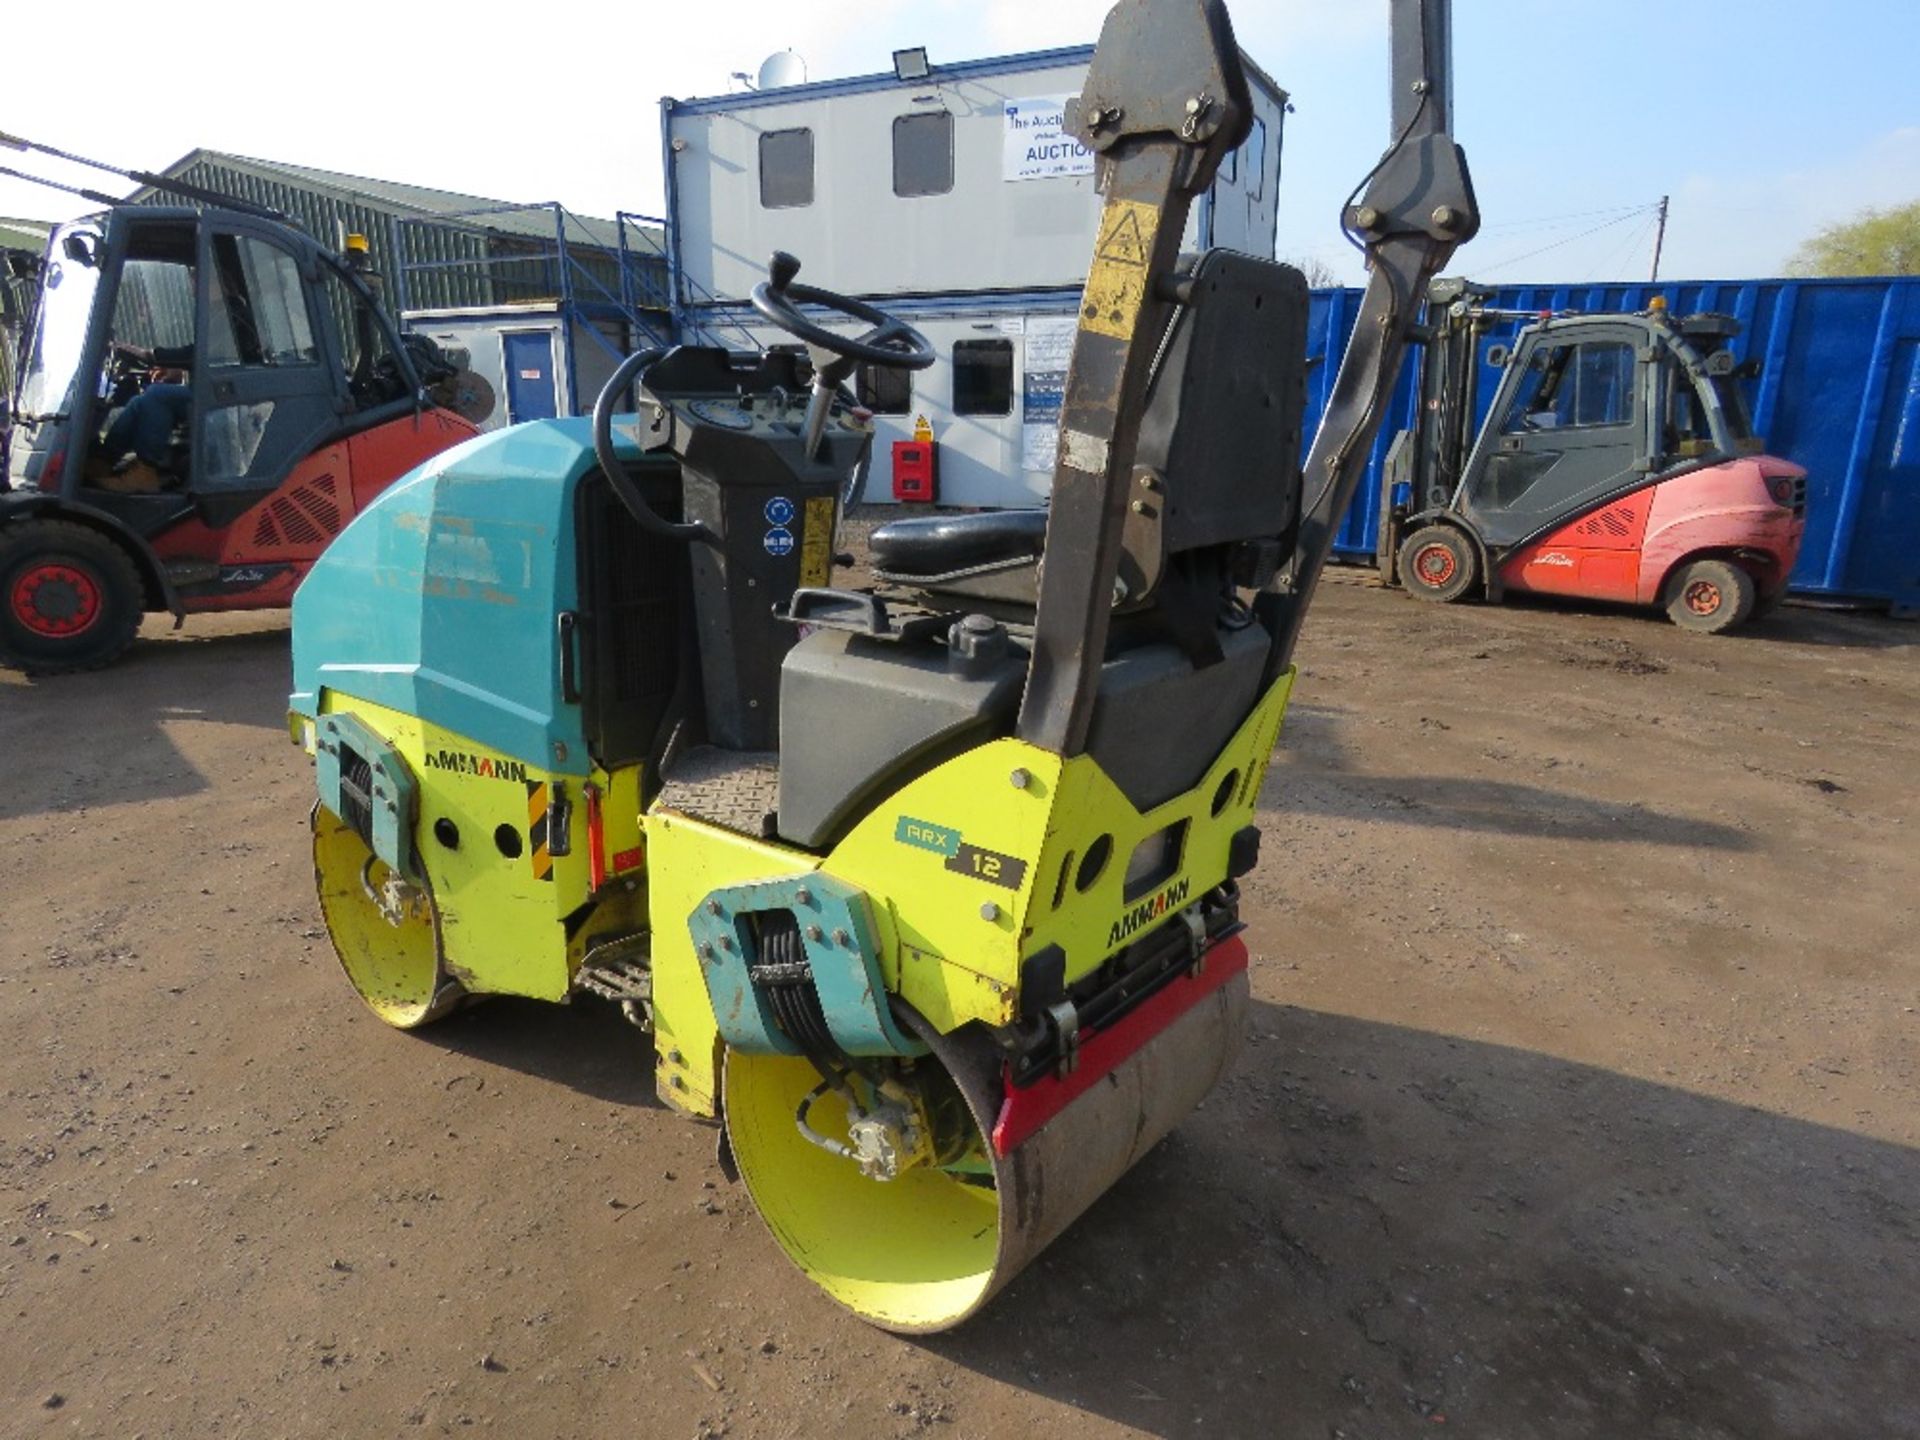 AMMANN ARX12 DOUBLE DRUM RIDE ON ROLLER YEAR 2013 BUILD. 812.3 REC HOURS. SN:TFAARX12ED0013258. DIRE - Image 3 of 13